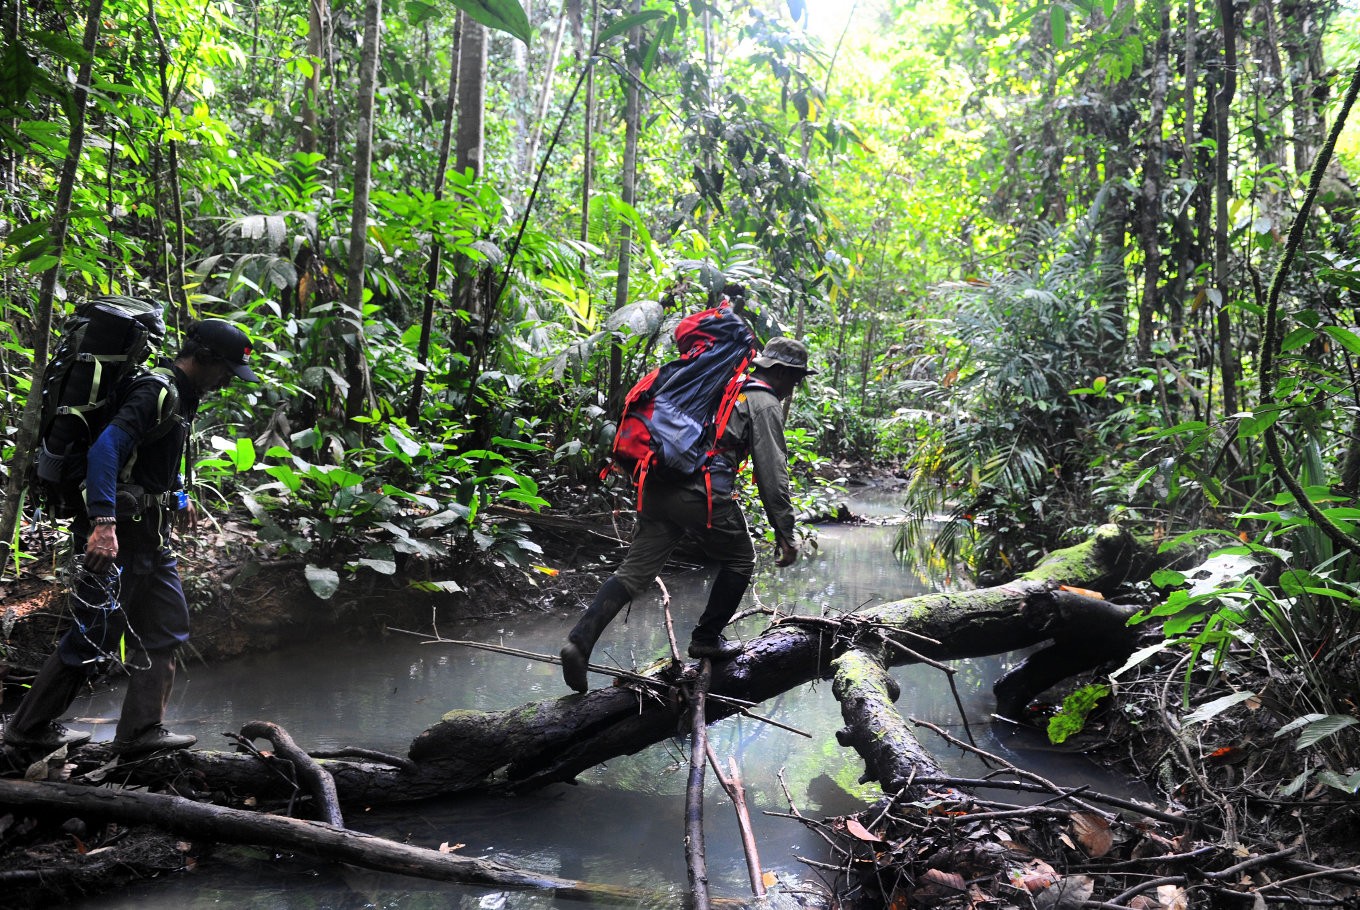 Indonesian forest rangers making their way through the Leuser ecosystem rainforest, located mostly within the province of Aceh on the northern tip of the island of Sumatra. Image: AFP / The Jakarta Post